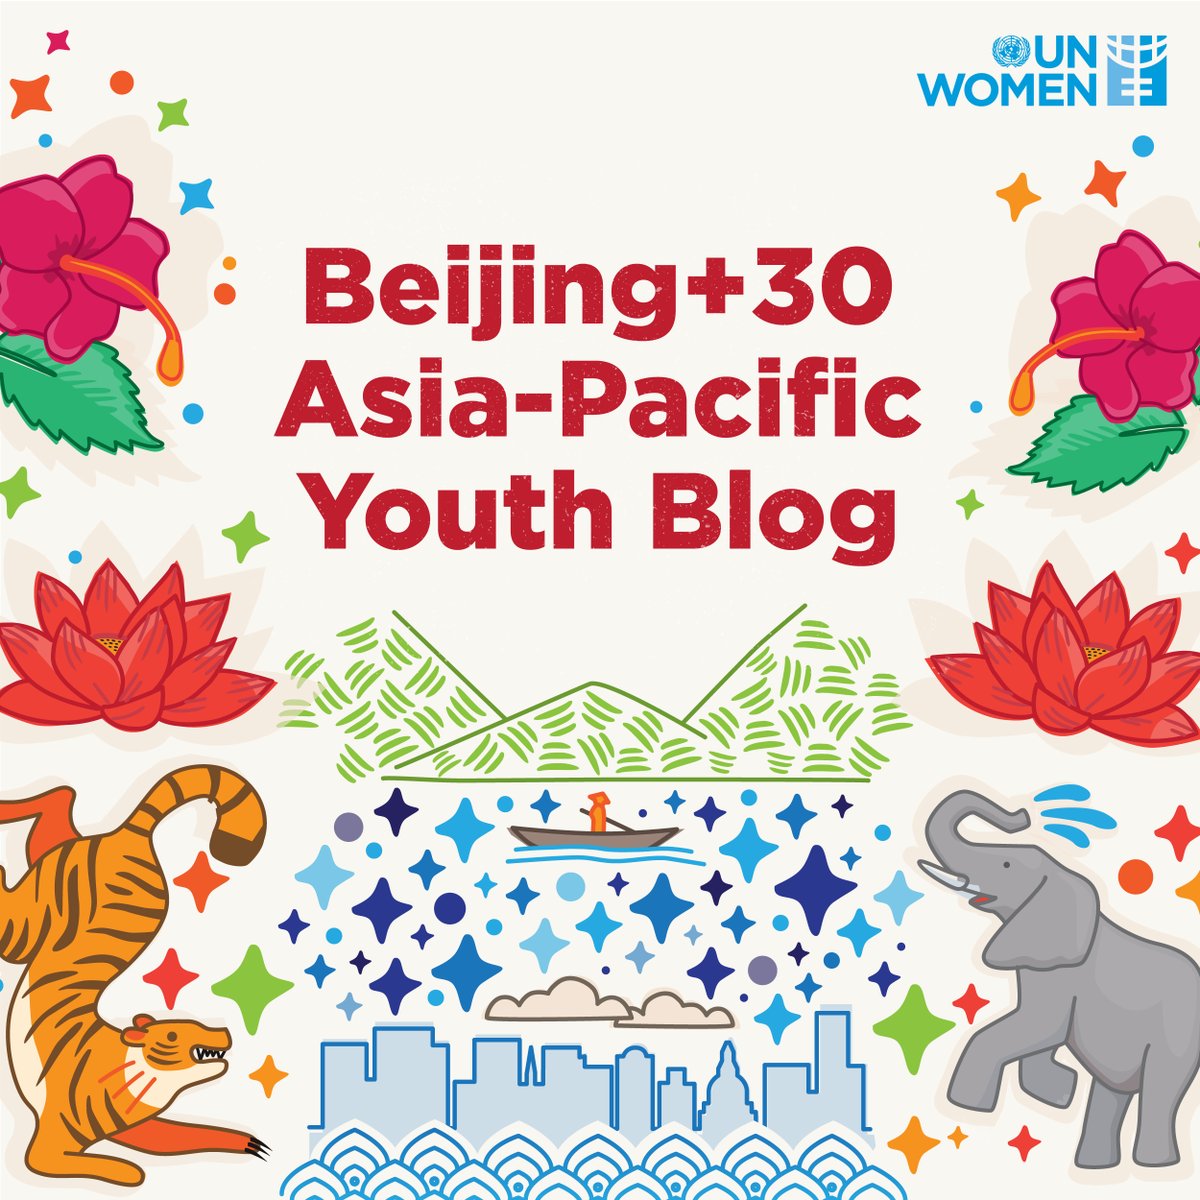 The Beijing Declaration and Platform for Actions turns 30 next year and to celebrate, we’re relaunching our Youth Blog in Asia-Pacific! Read more: unwo.men/xJ0p50RhLQc